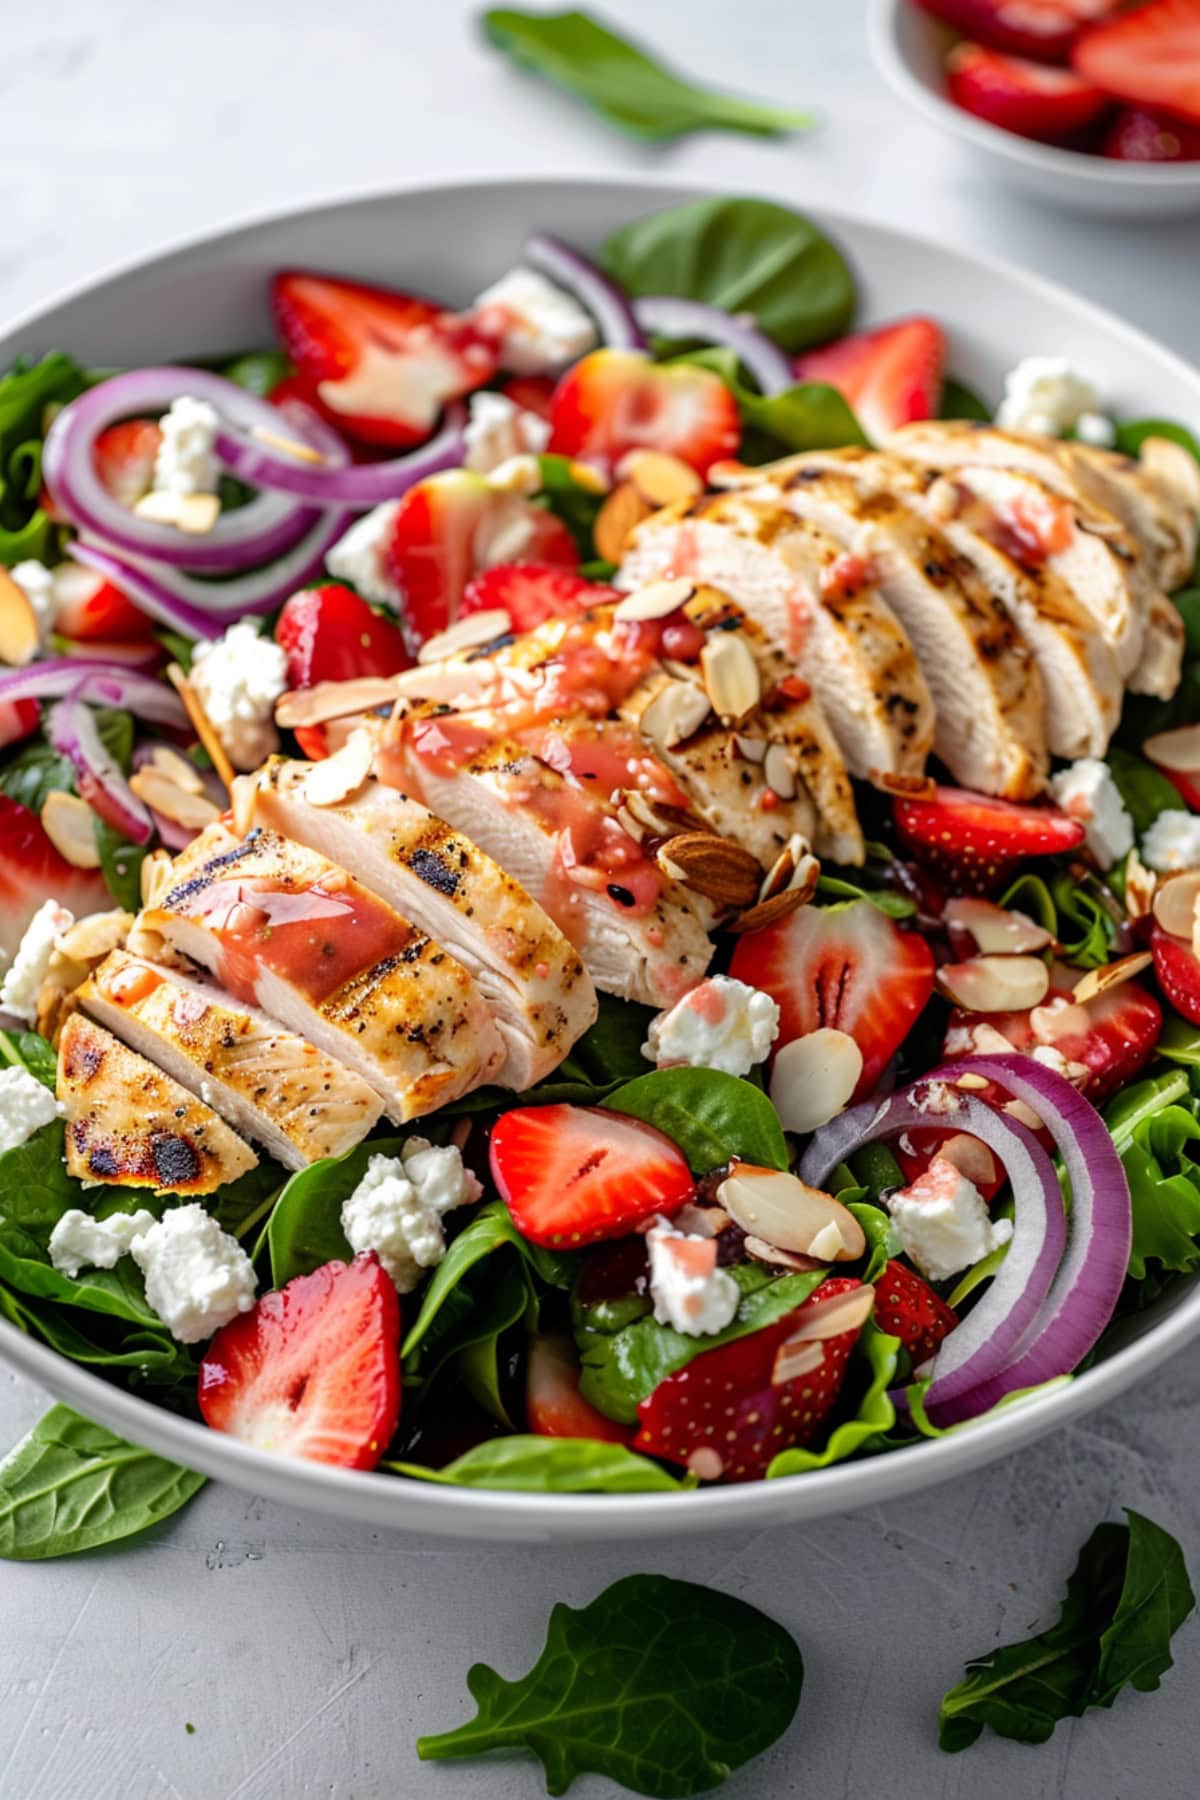 A serving of salad with mixed greens, feta cheese, sliced almonds and onions topped with sliced grilled chicken breast drizzled with strawberry dressing on a white bowl.